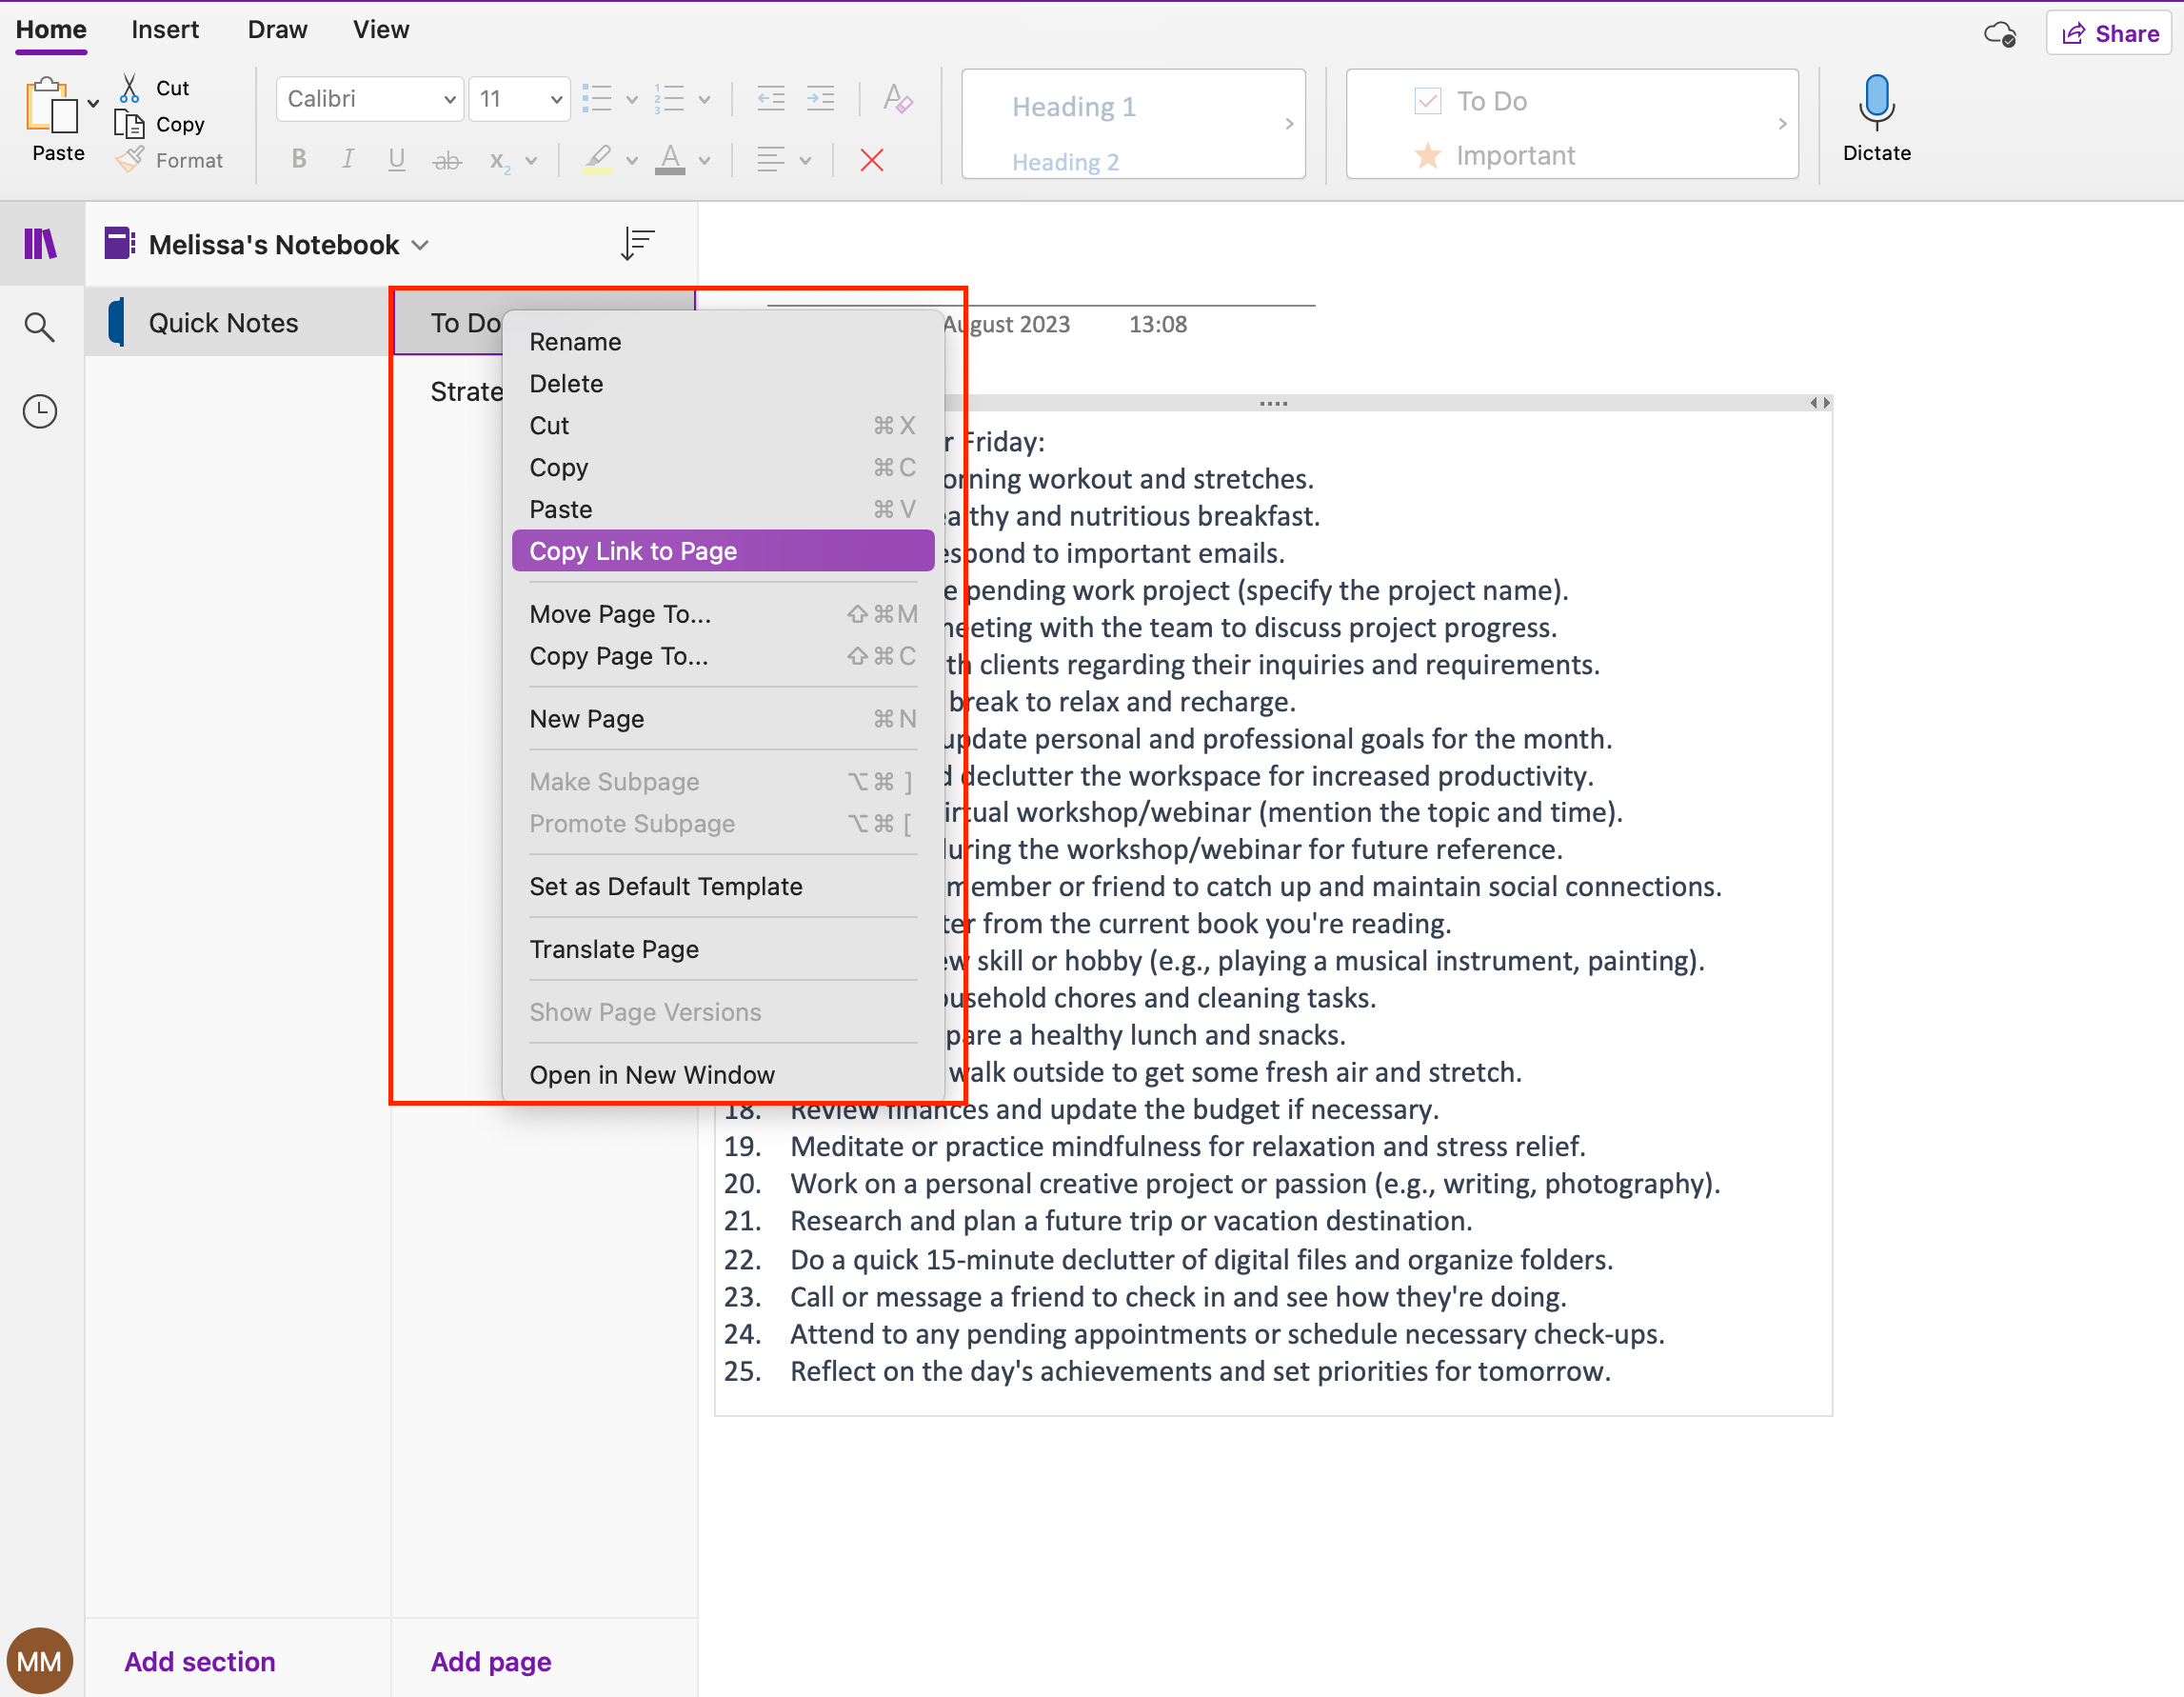 Copying a link to a notebook on OneNote